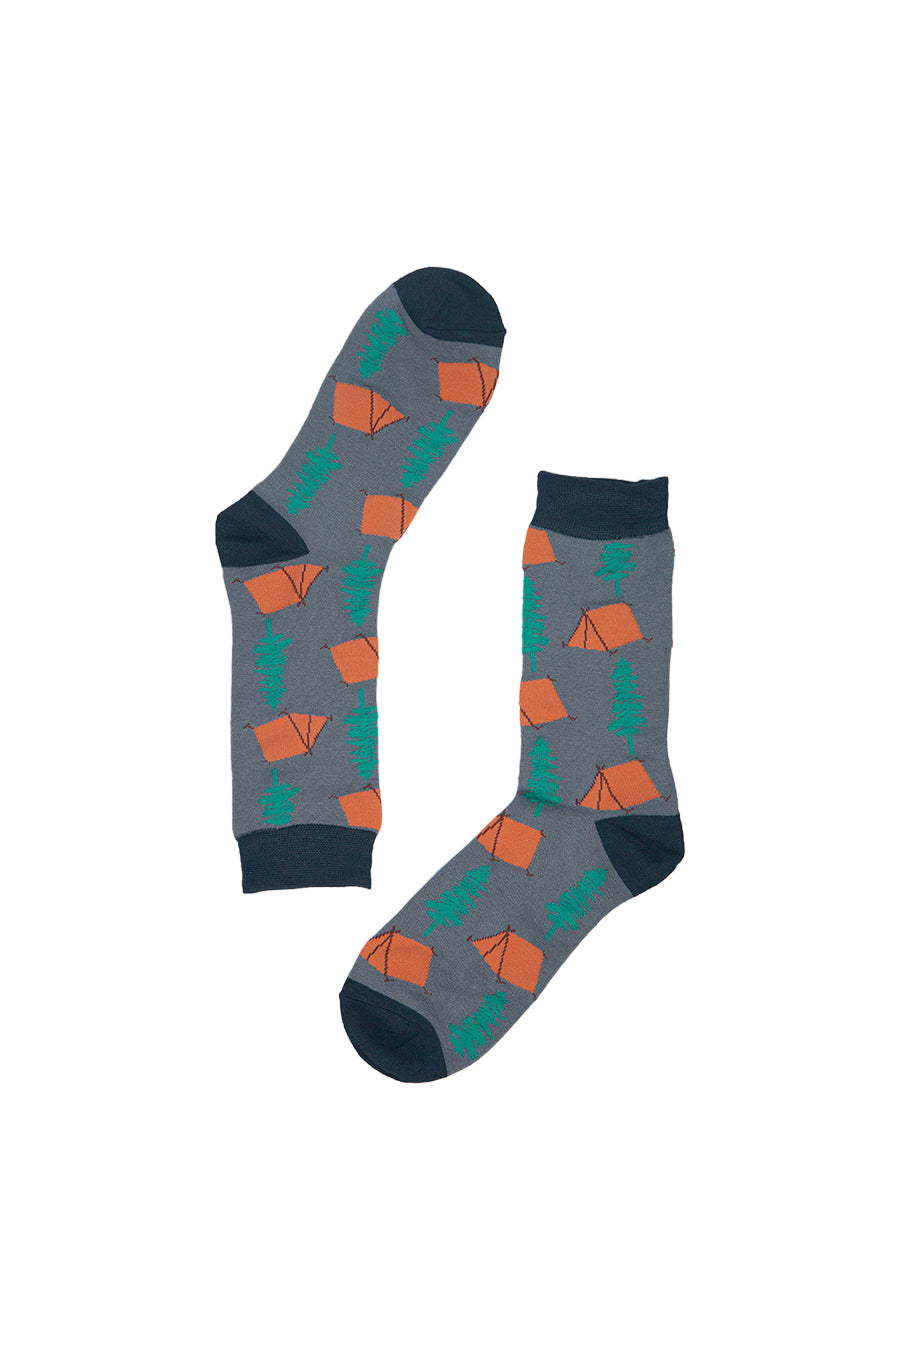 men's bamboo camping socks featuring tents, trees and campfires